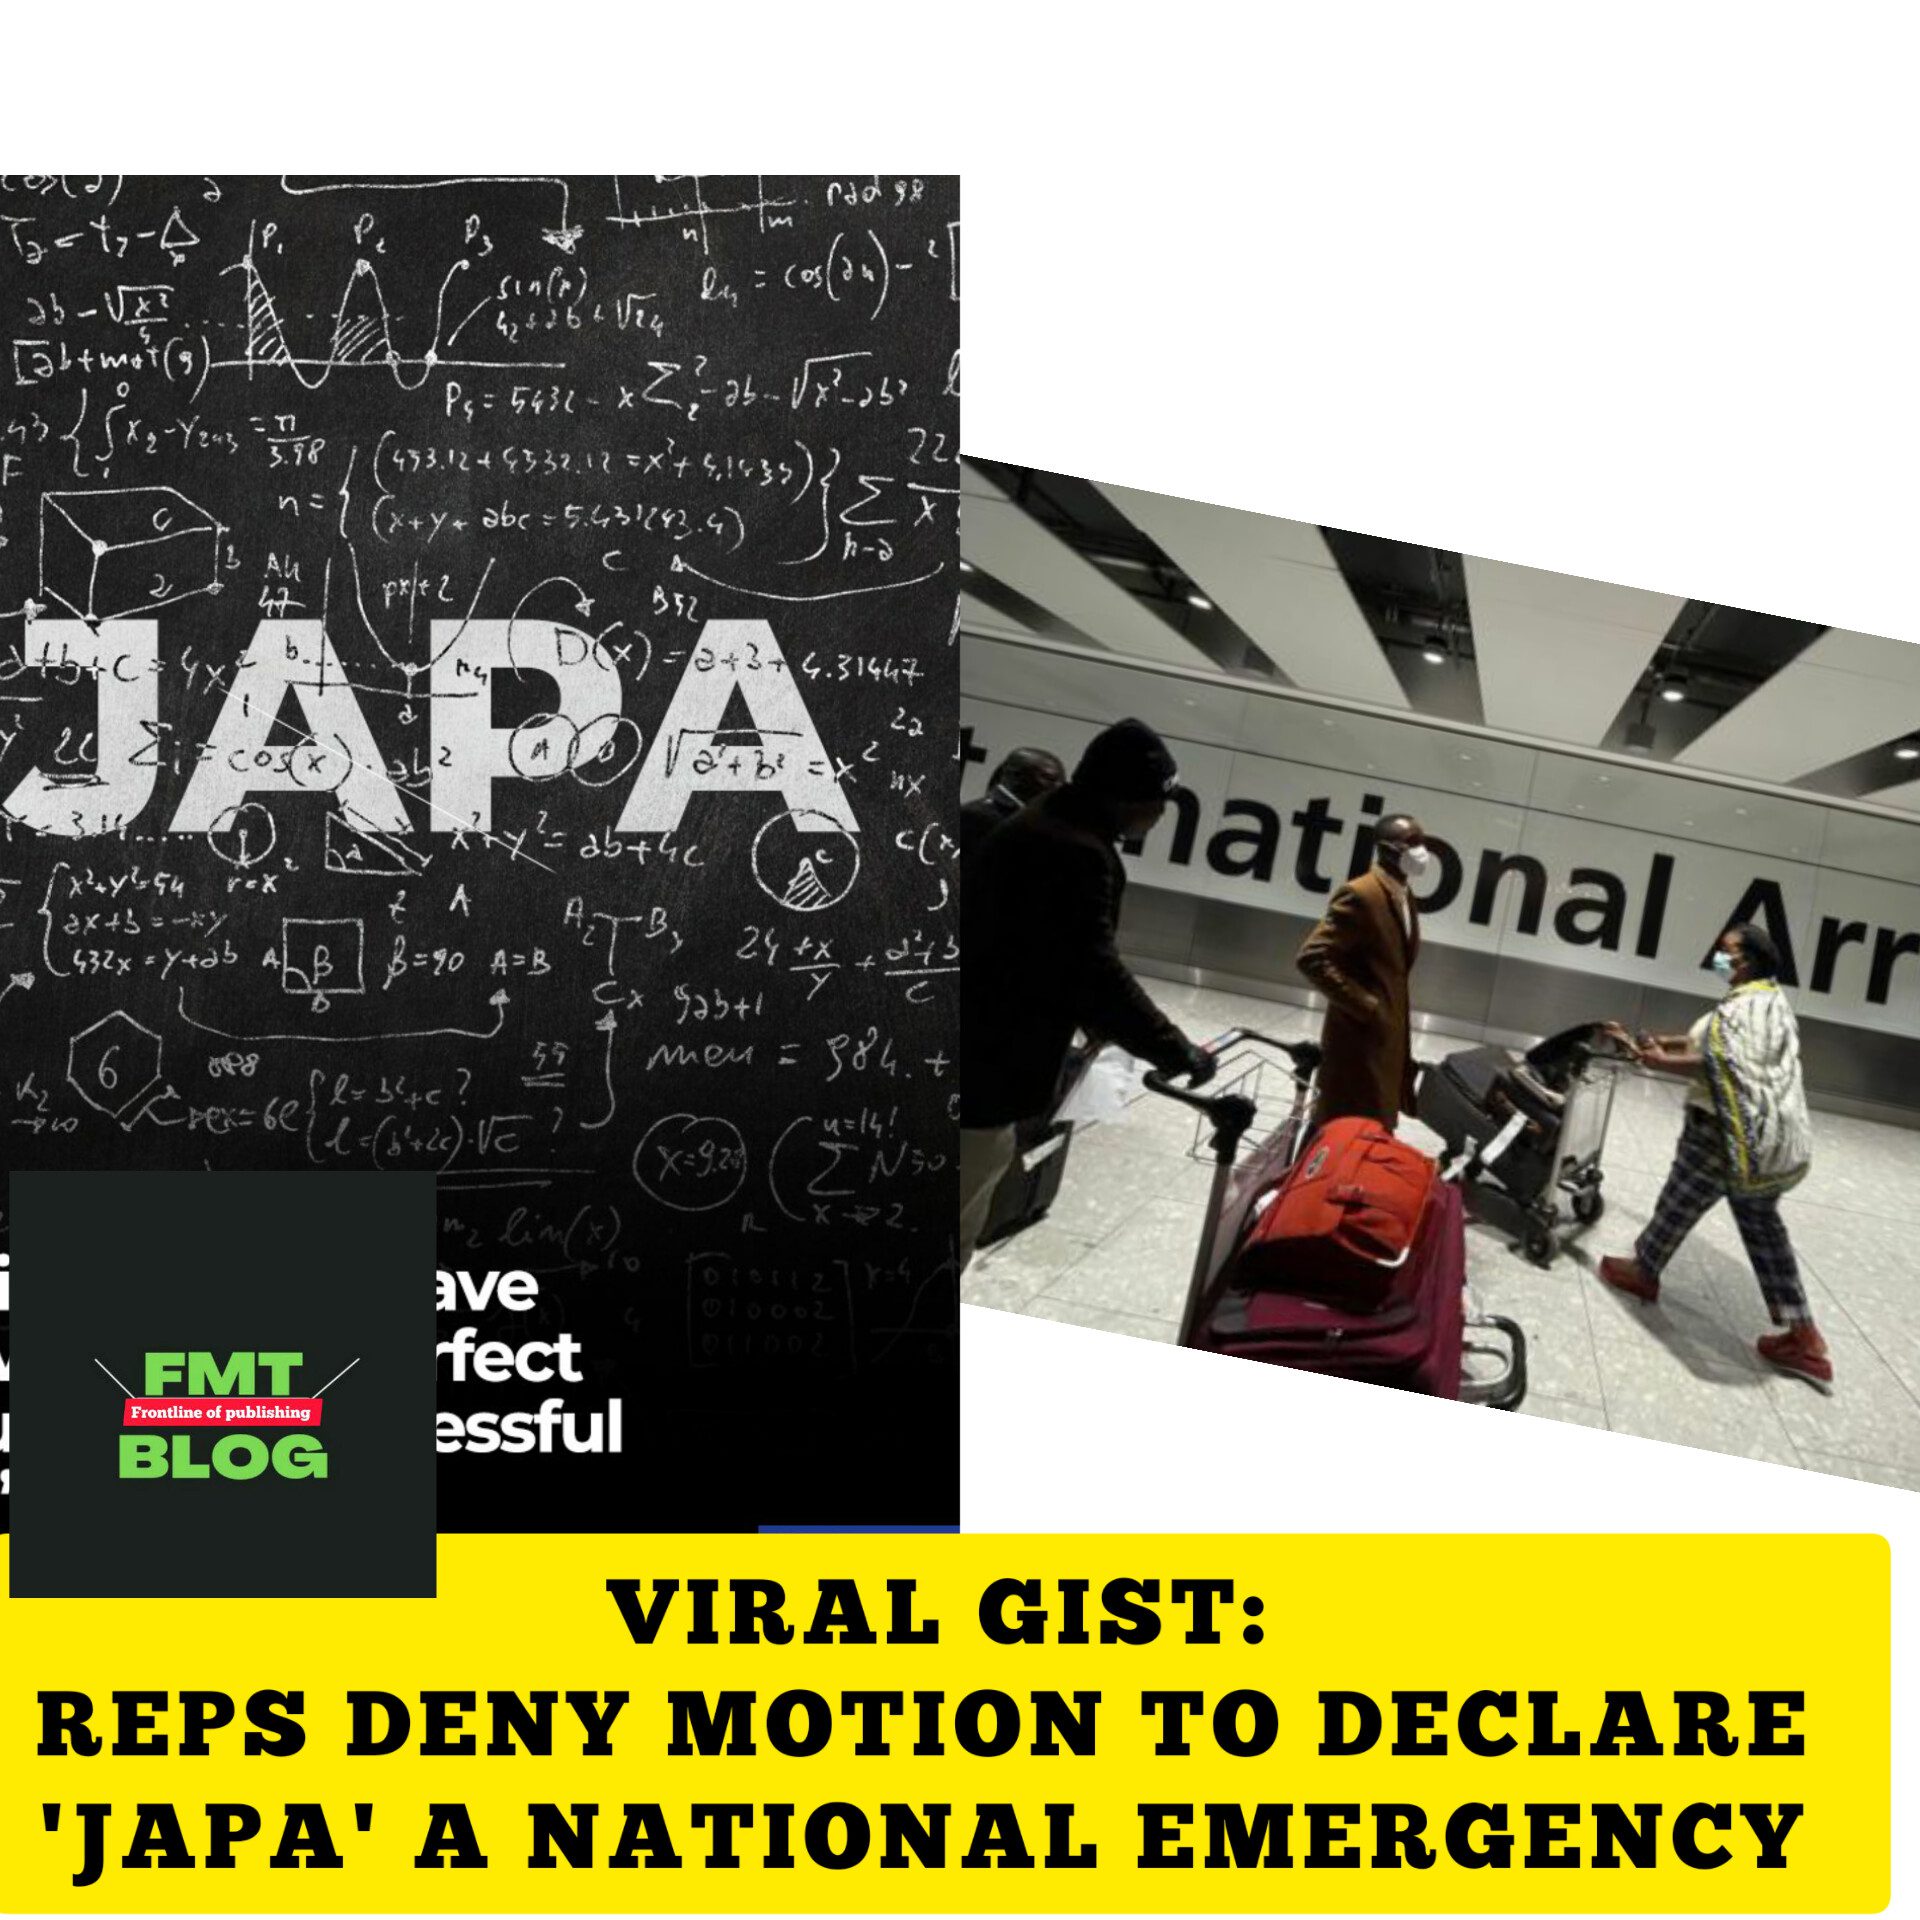 Reps Deny Motion to Declare ‘Japa’ a National Emergency